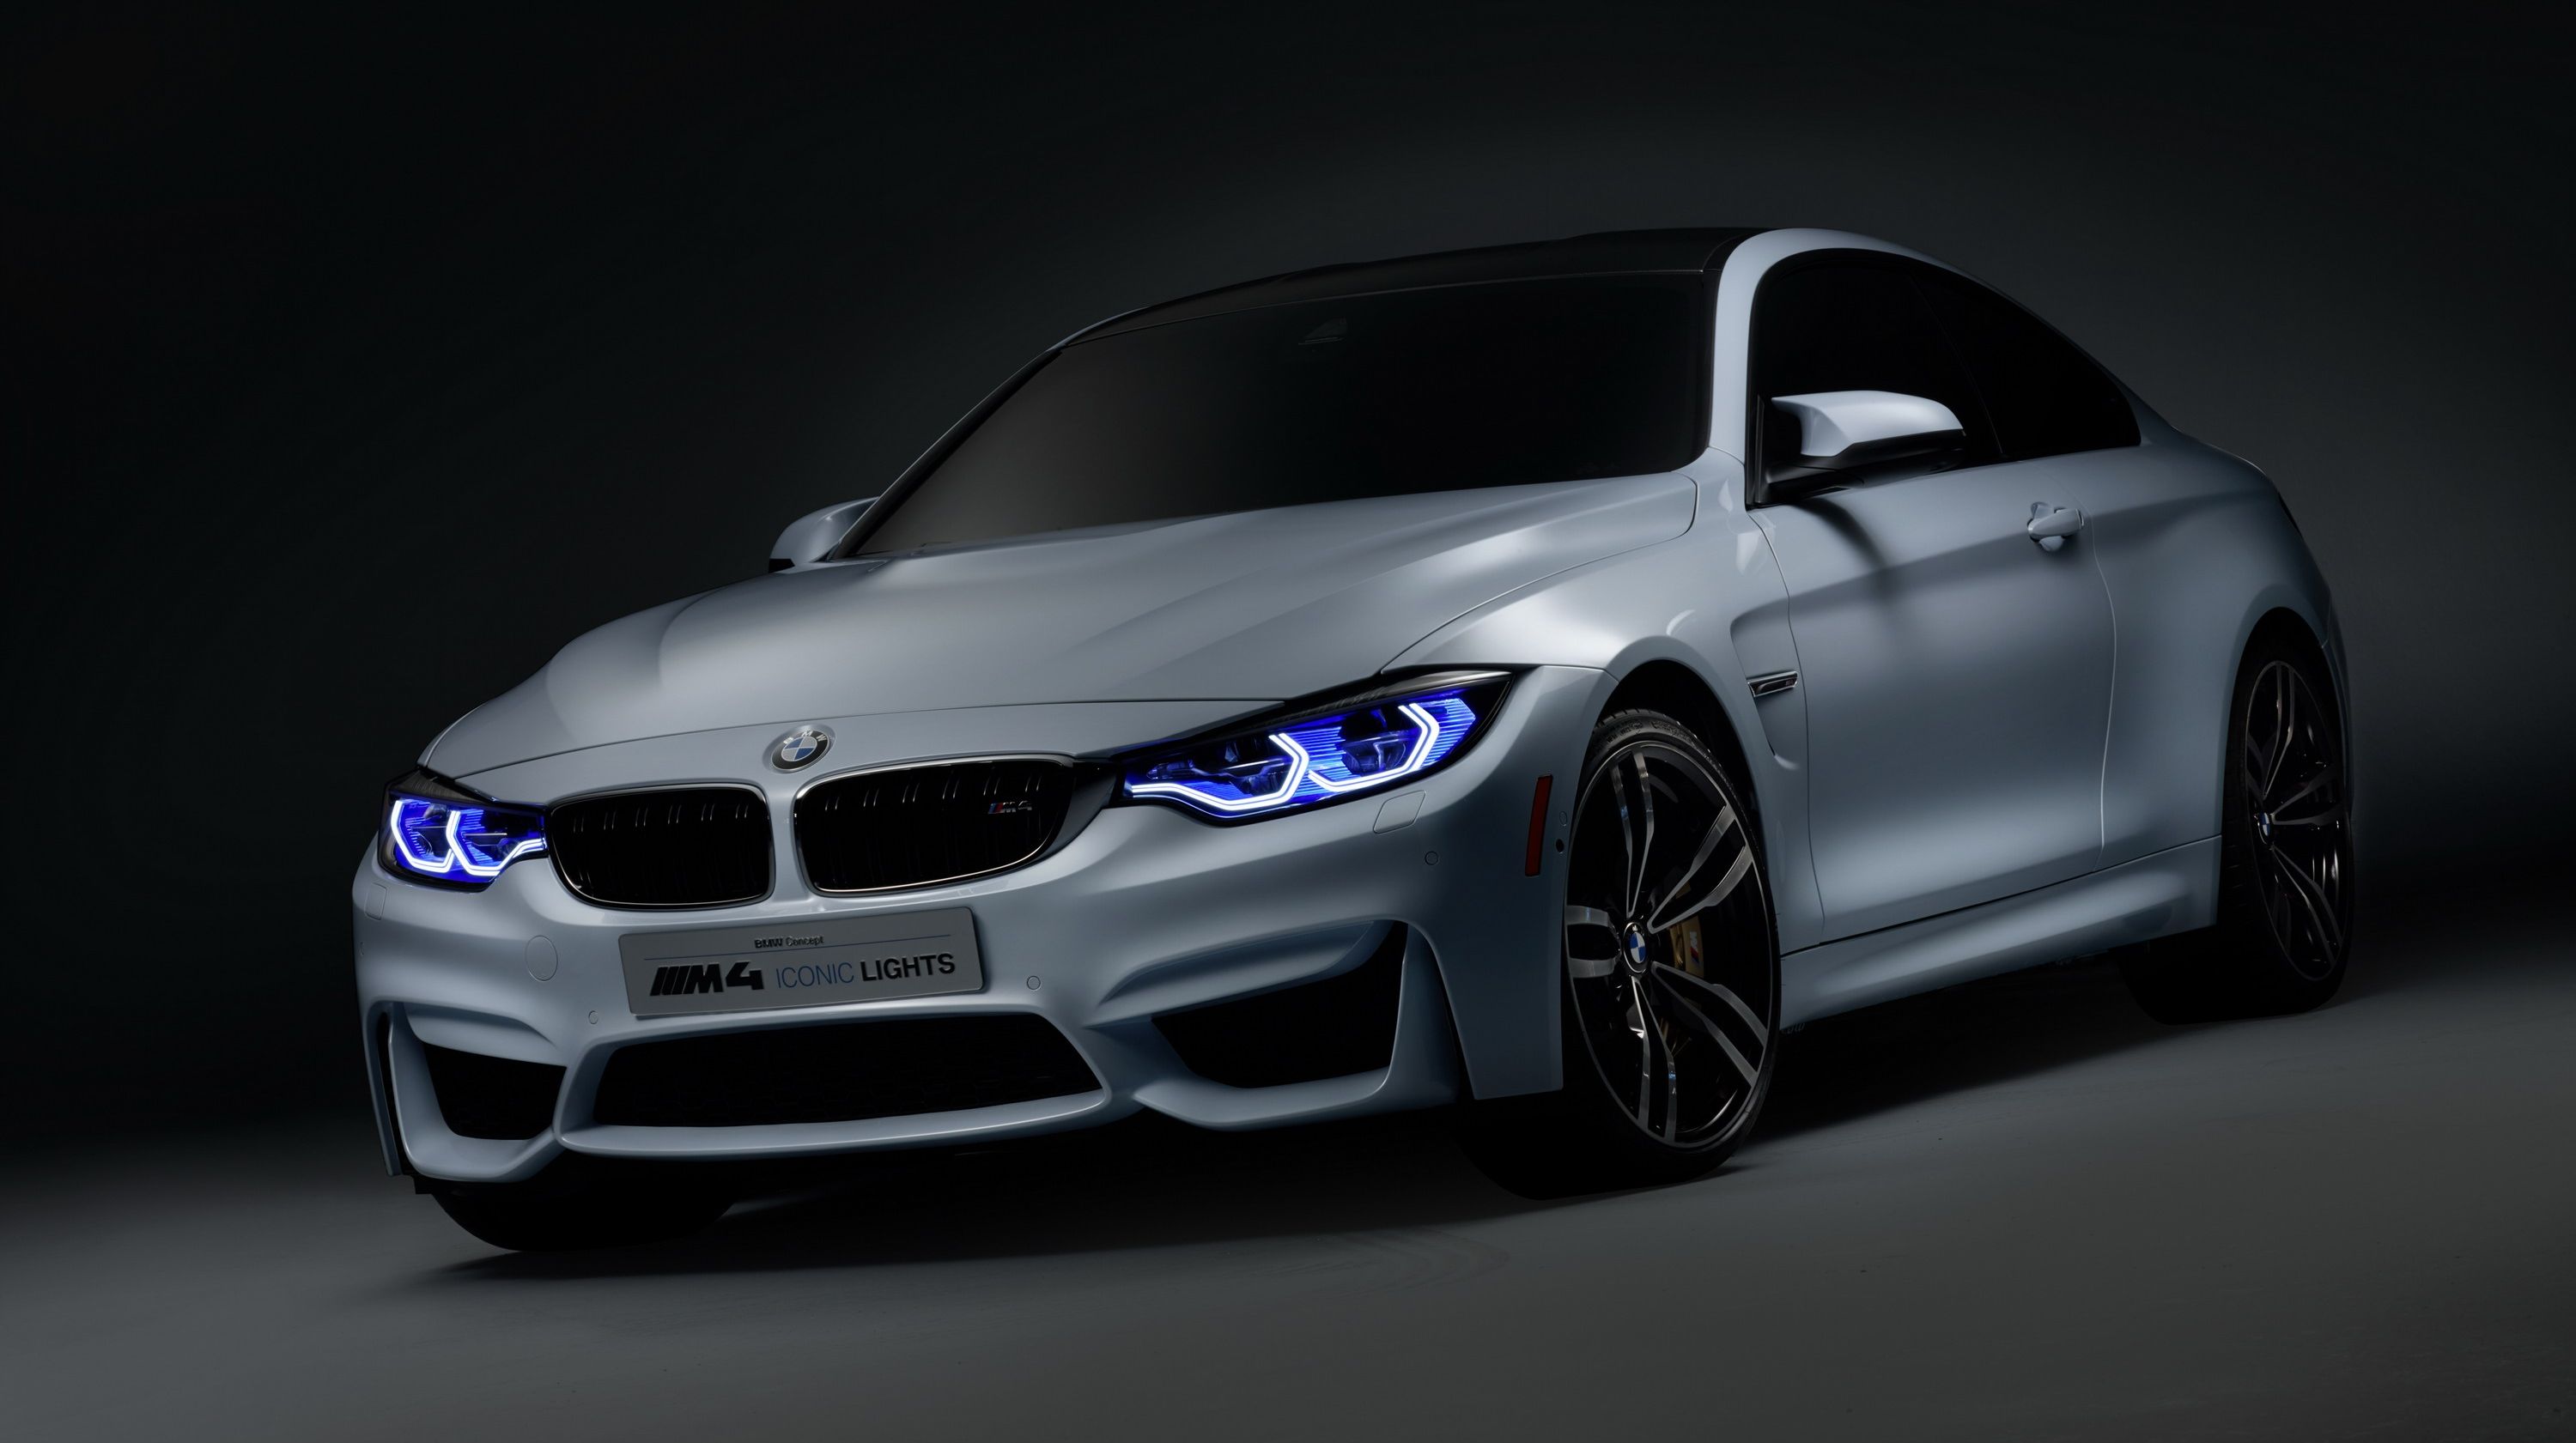  BMW showed of its new OLED taillitghts and LAzerlight headlights with this stunning M4 concept. 